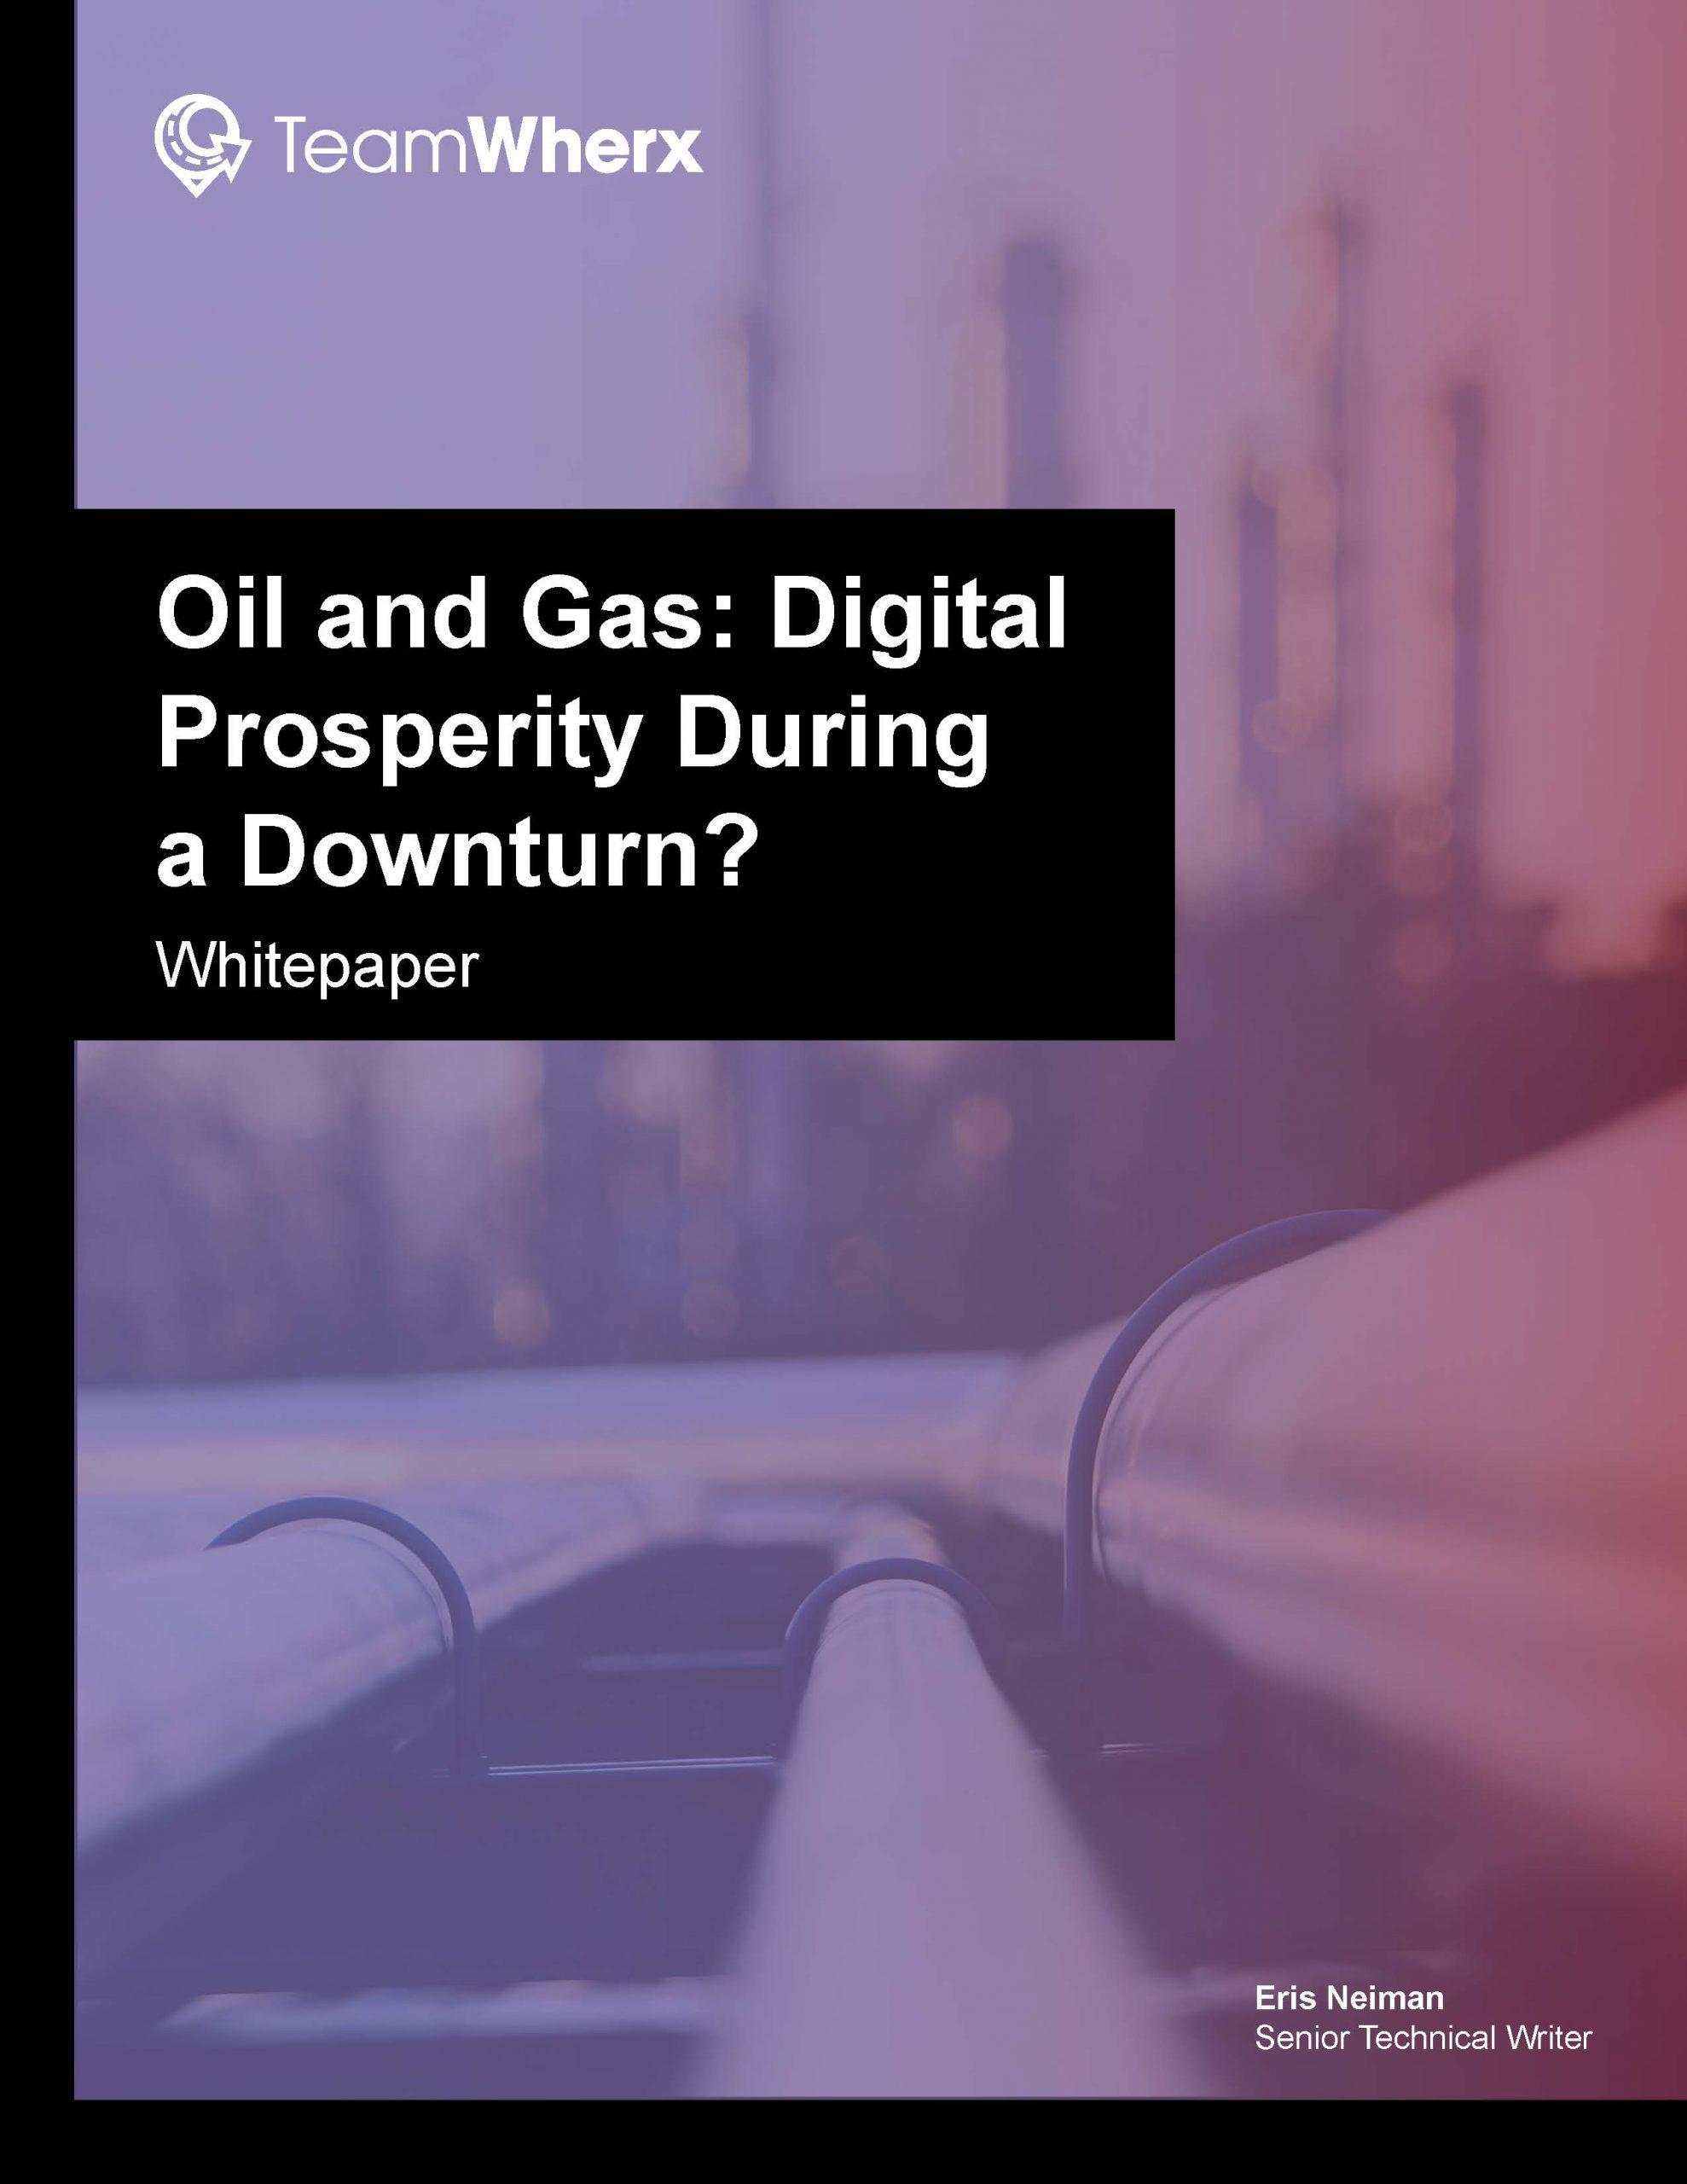 Oil and Gas Digital Prosperity During a Downturn